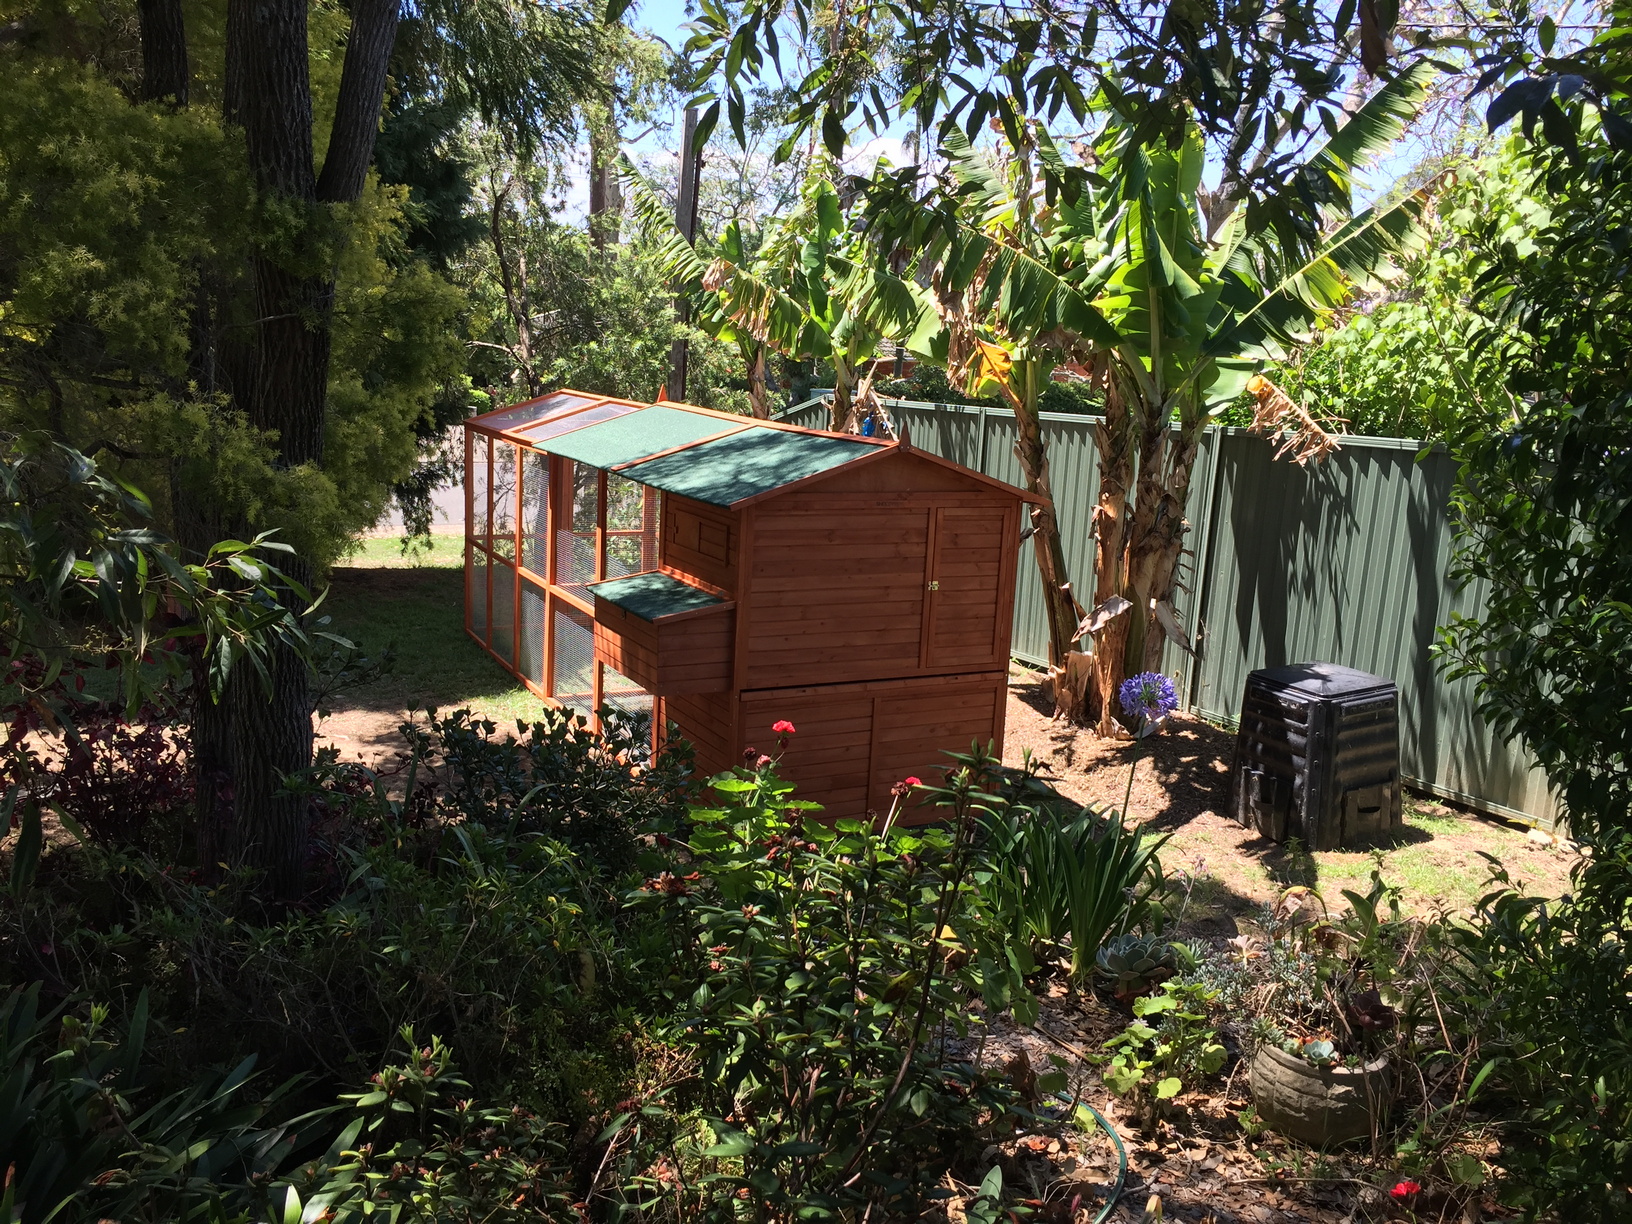 Shot of the chicken coop taken from the front balcony of our house. It seems to fit well in the front yard, leaving enough space to comfortably walk around all sides. The location gets morning shade from the banana trees and afternoon shade from the giant Cypress pine at the front.